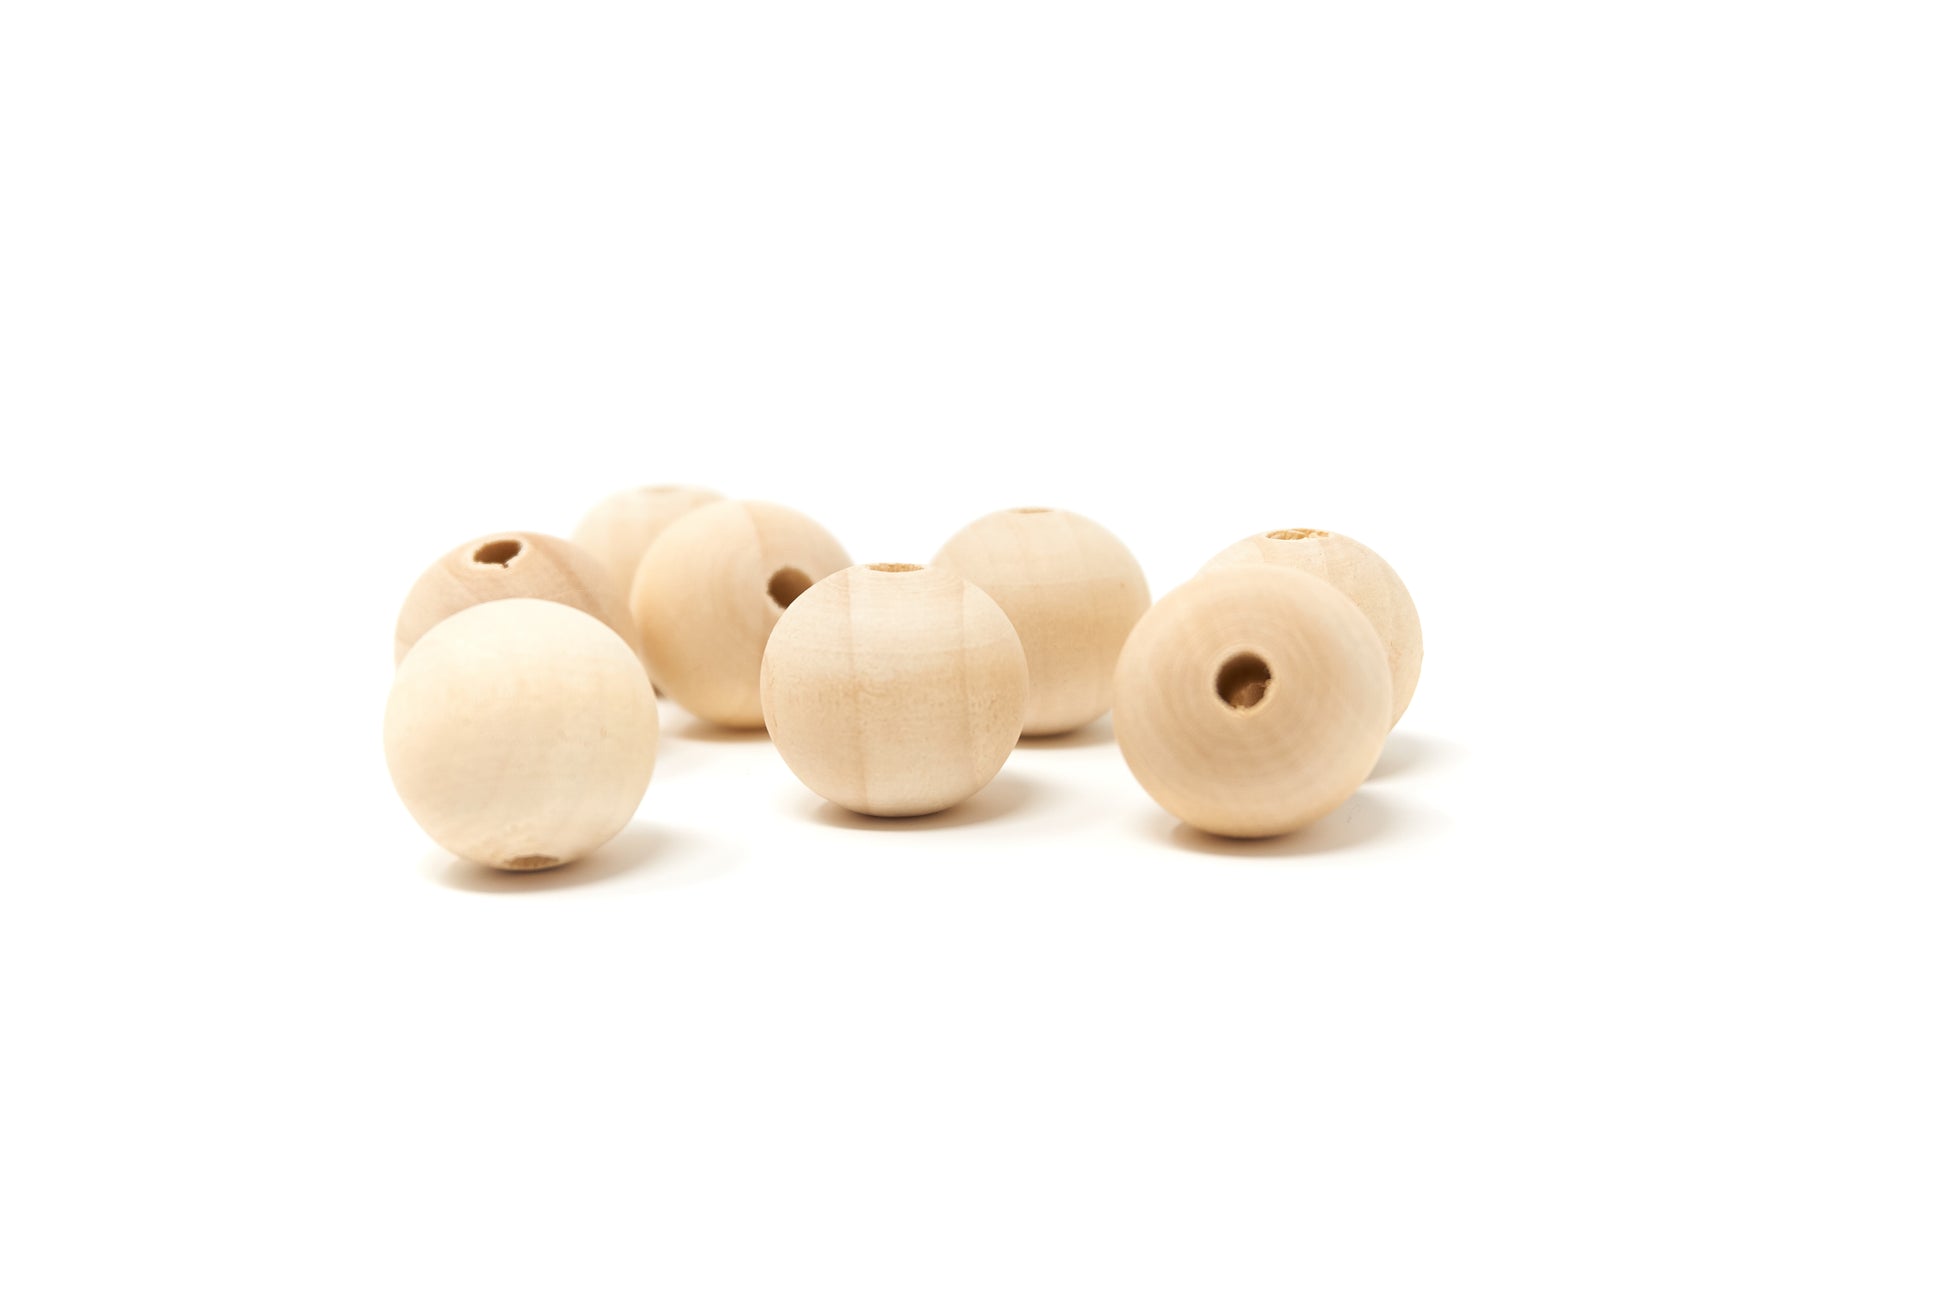 Natural Round Wood Beads 20mm 20 pieces - Cameos Art Shop